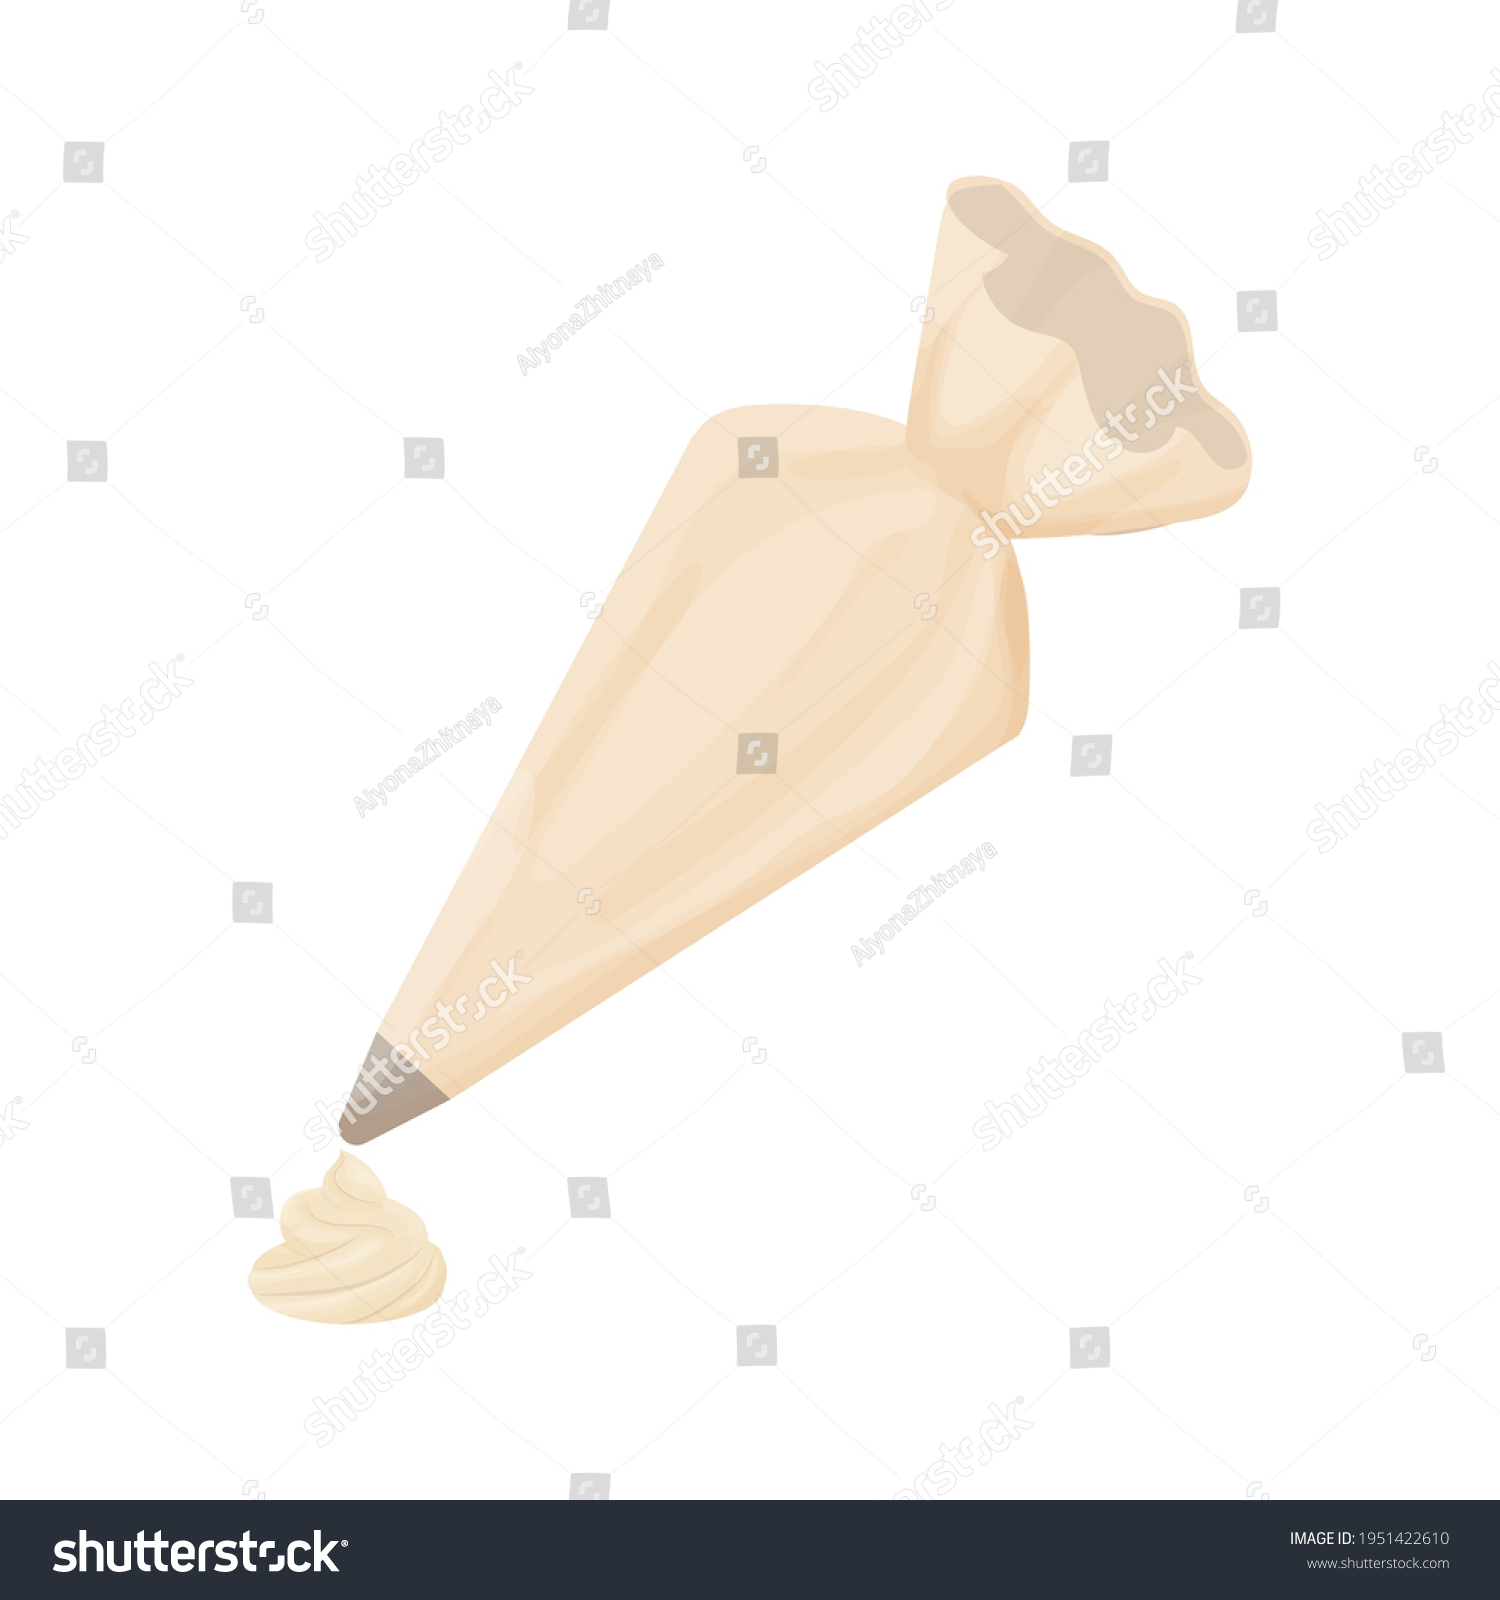 SVG of Pastry Bag icing with cream baking process in cartoon flat style isolated on white background. Kitchen equipment, utensil. For cake decoration, cream preparation. svg